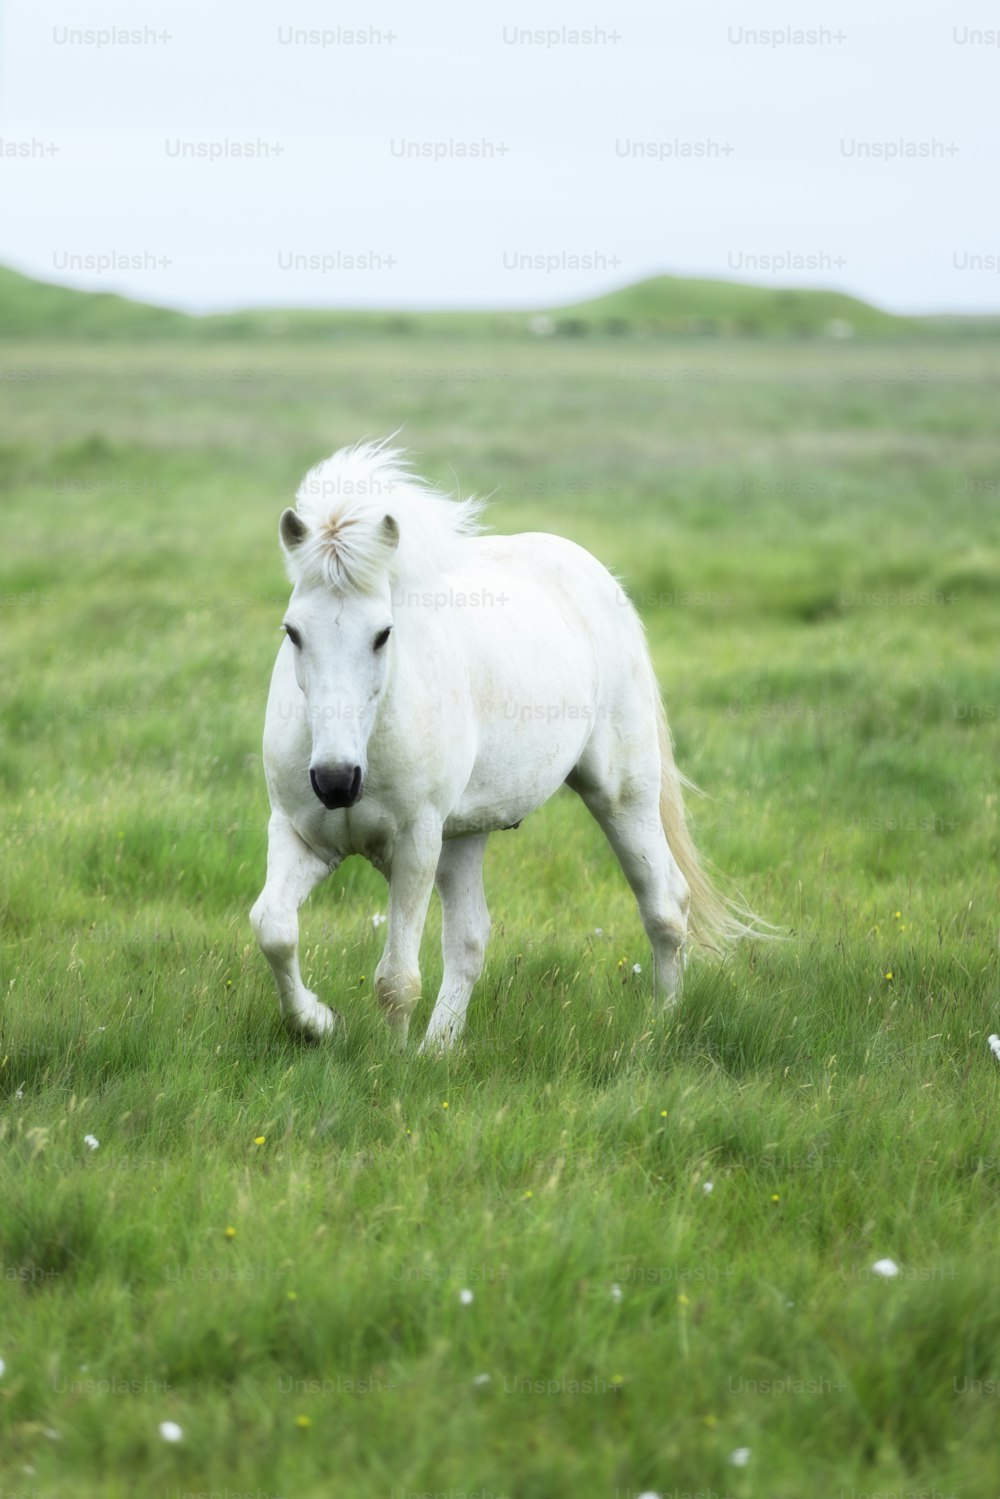 a white horse is standing in a grassy field